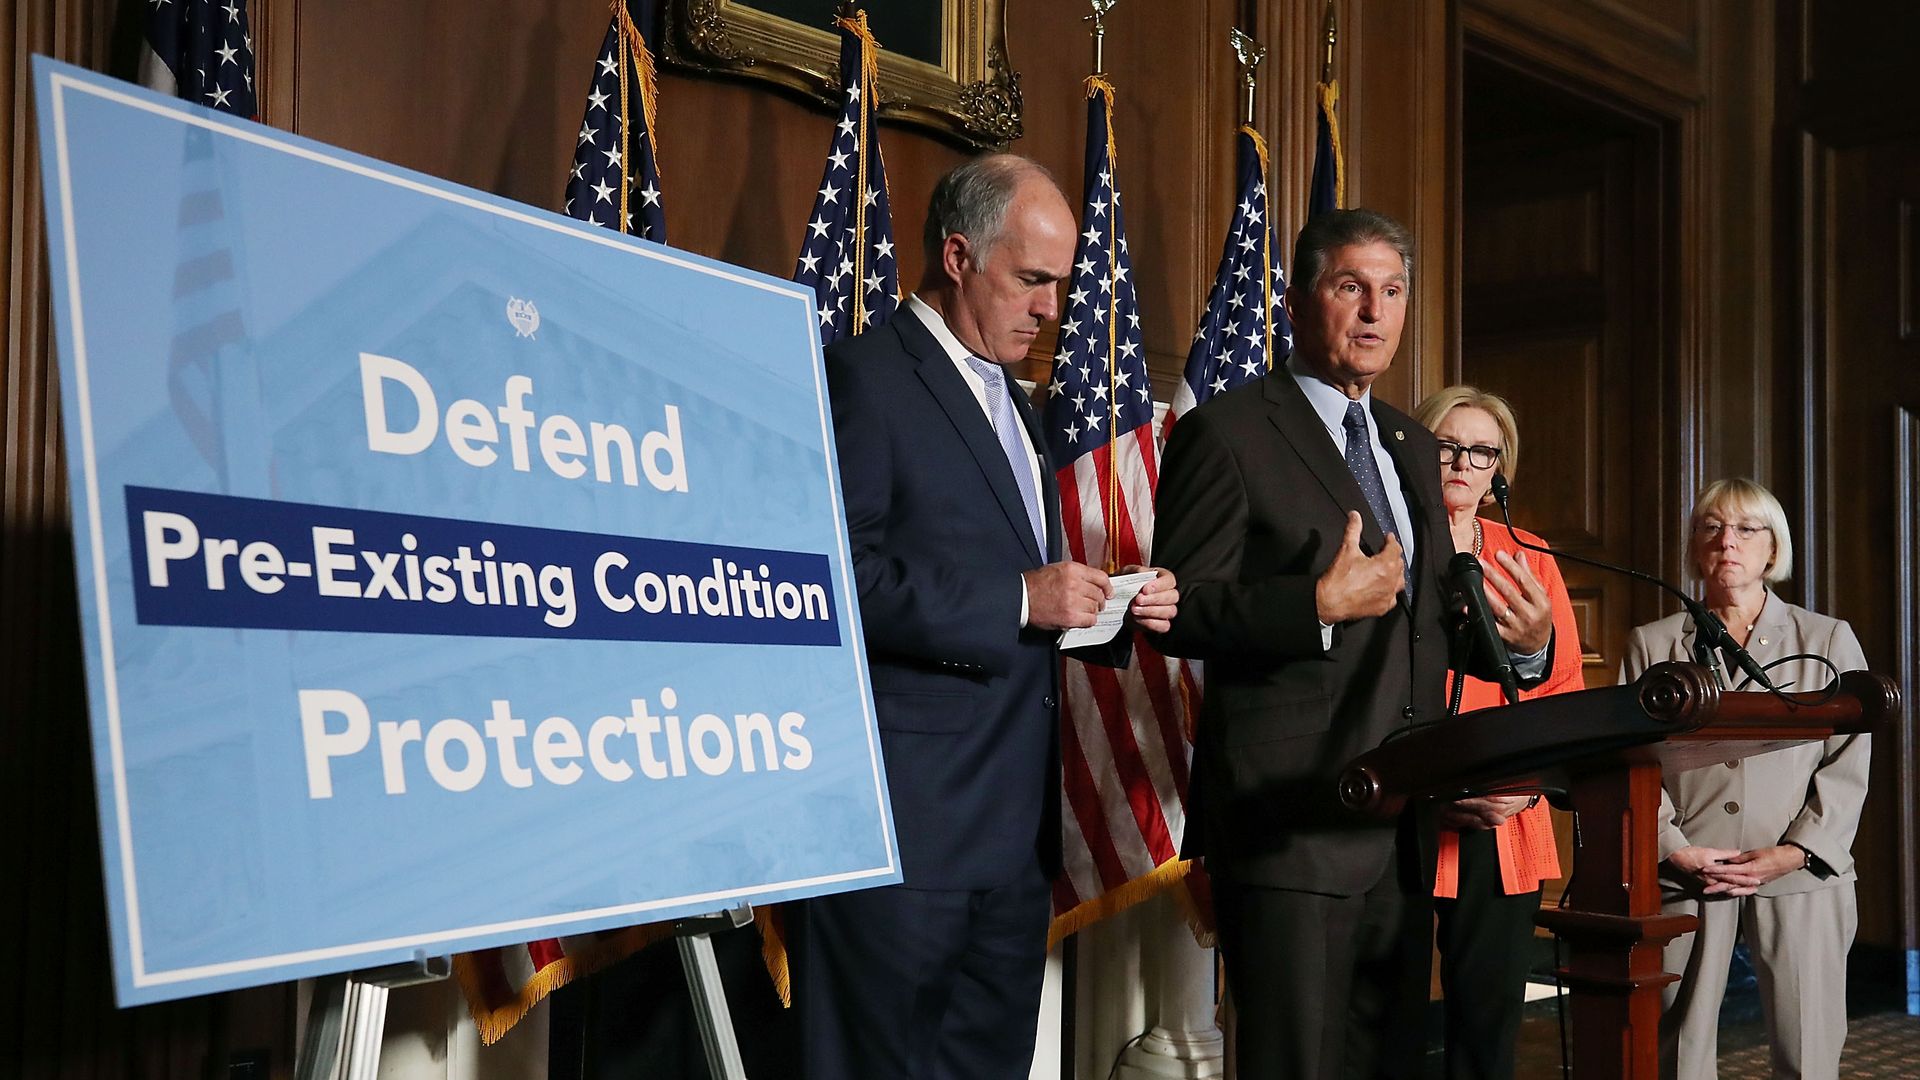 Sen. Joe Manchin (D-WV) with a big sign that says Defend Pre-Existing Conditions